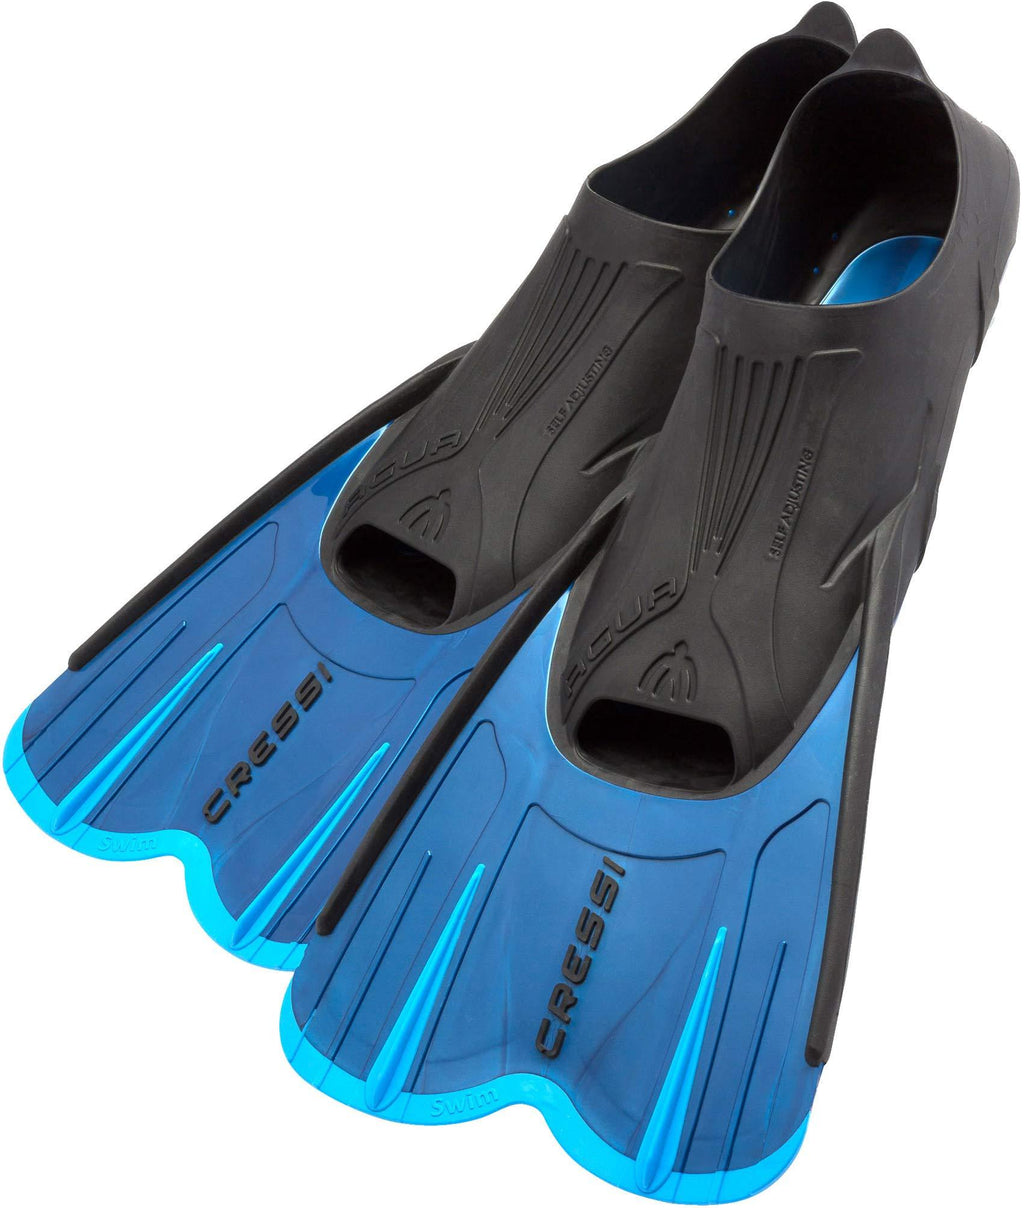 [AUSTRALIA] - Cressi Adult Short Light Swim Fins with Self-Adjustable Comfortable Full Foot Pocket | Perfect for Traveling | Agua Short: Made in Italy US Man 8.5/9.5 | US Lady 9.5/10.5 | EU 41/42 Blue/Azure 